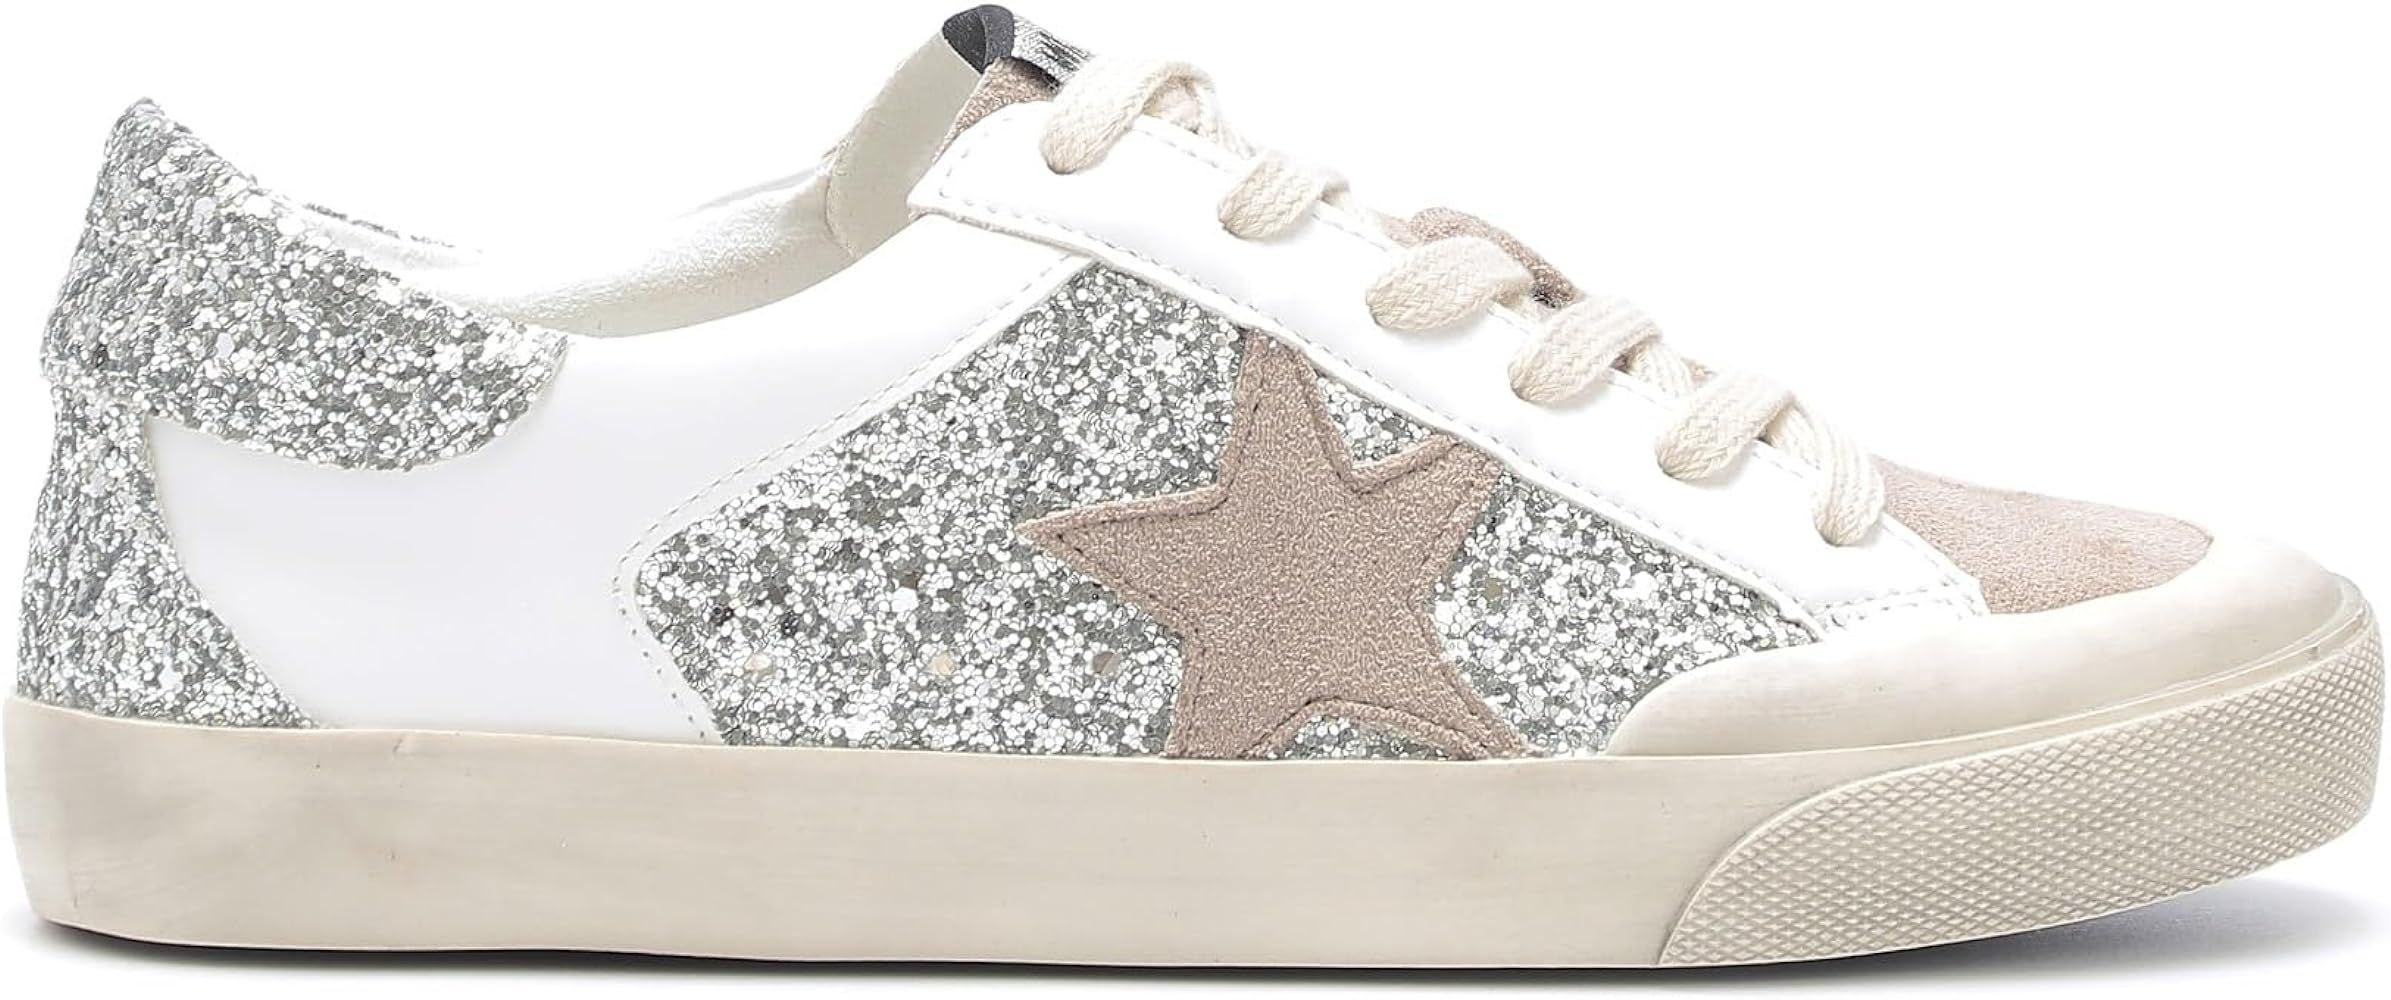 Mi.iM Harbor Rubber Sole Lace-up Glitter Leather Star Sneakers | Amazon (US)